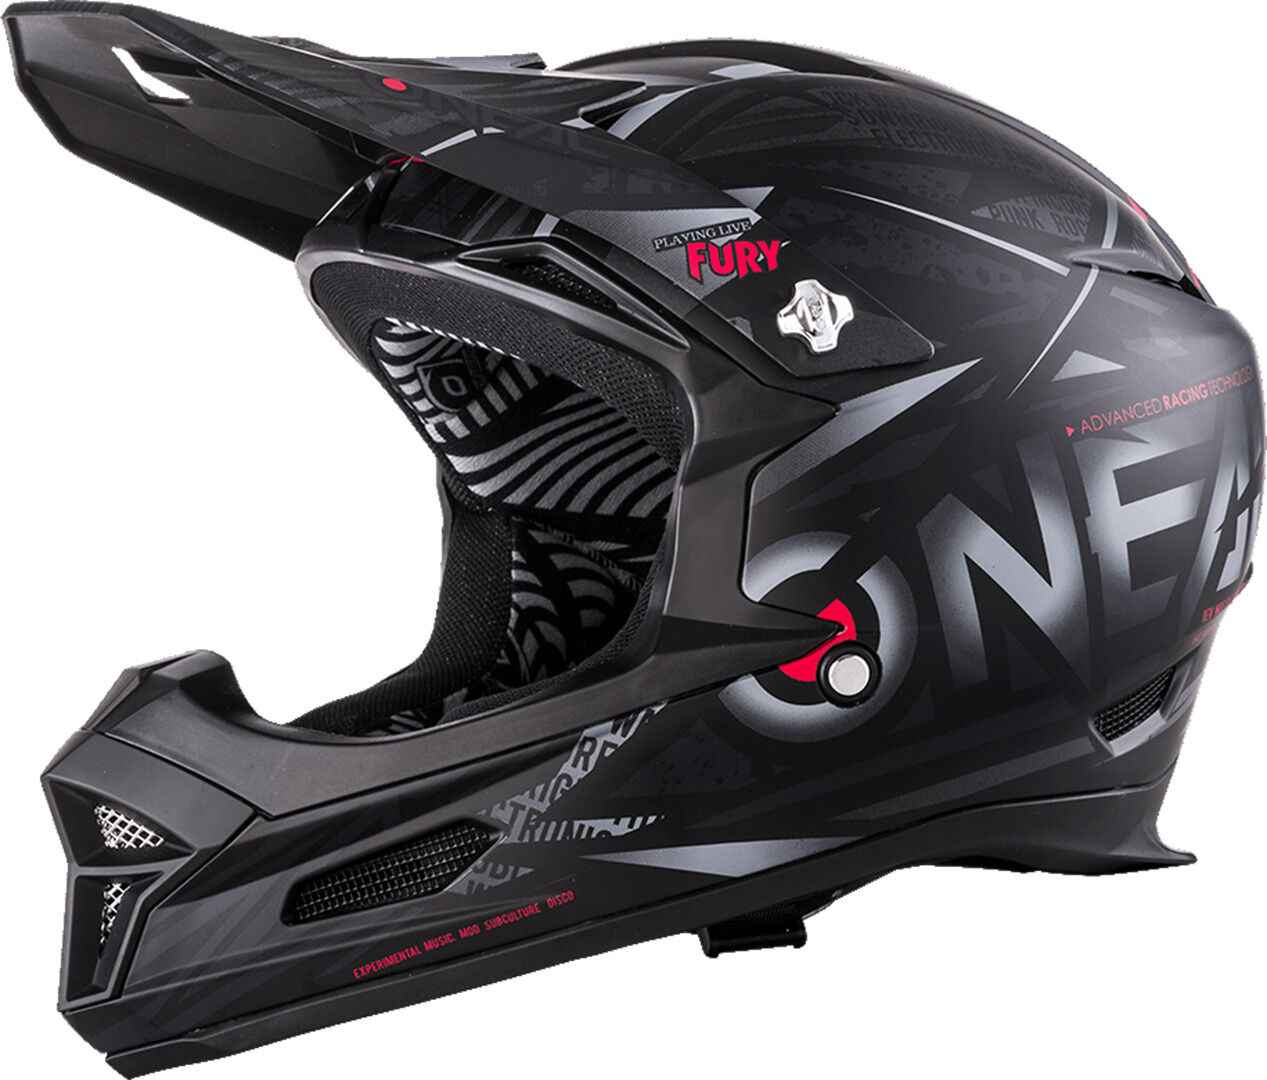 Oneal Fury Synthy Downhill Helm  - Black Grey